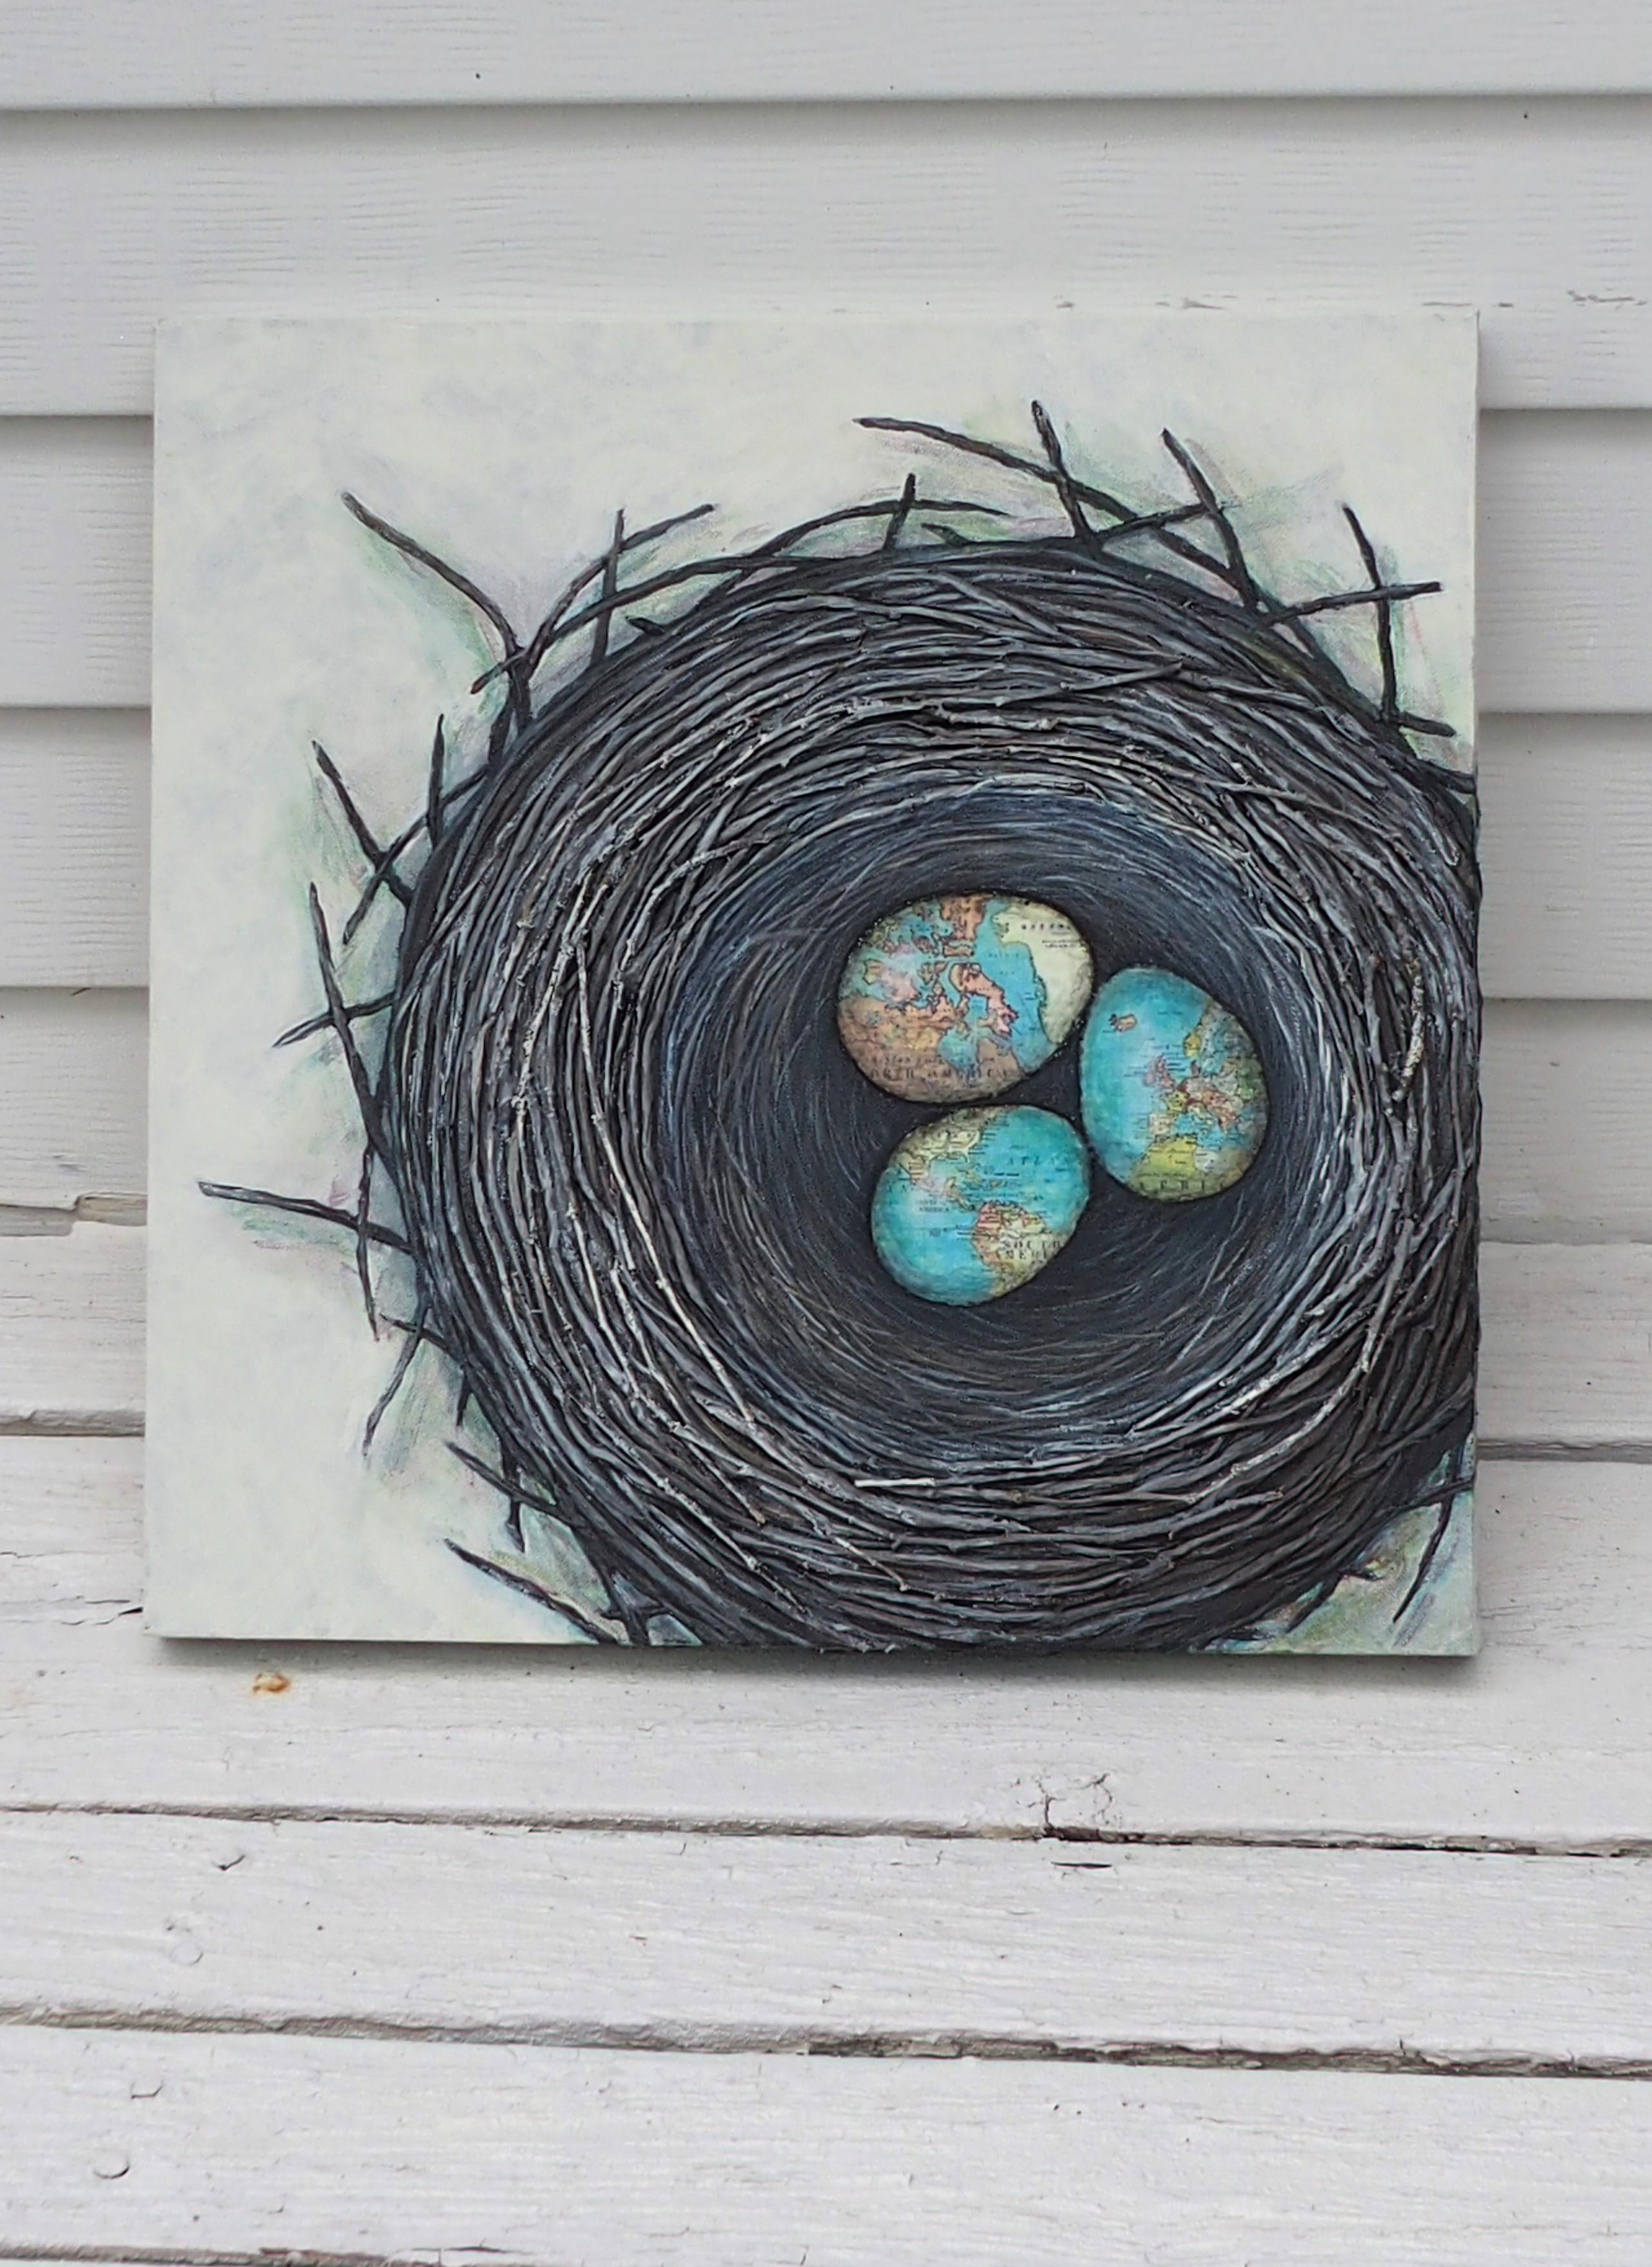 <p>Artist Comments<br />To create the depth of the nest, Jennifer collaged real twigs with textural acrylic medium. The three eggs were cut out from a paper map and then shaded to appear dimensional.</p><br /><p>About the Artist<br />Jennifer Ross